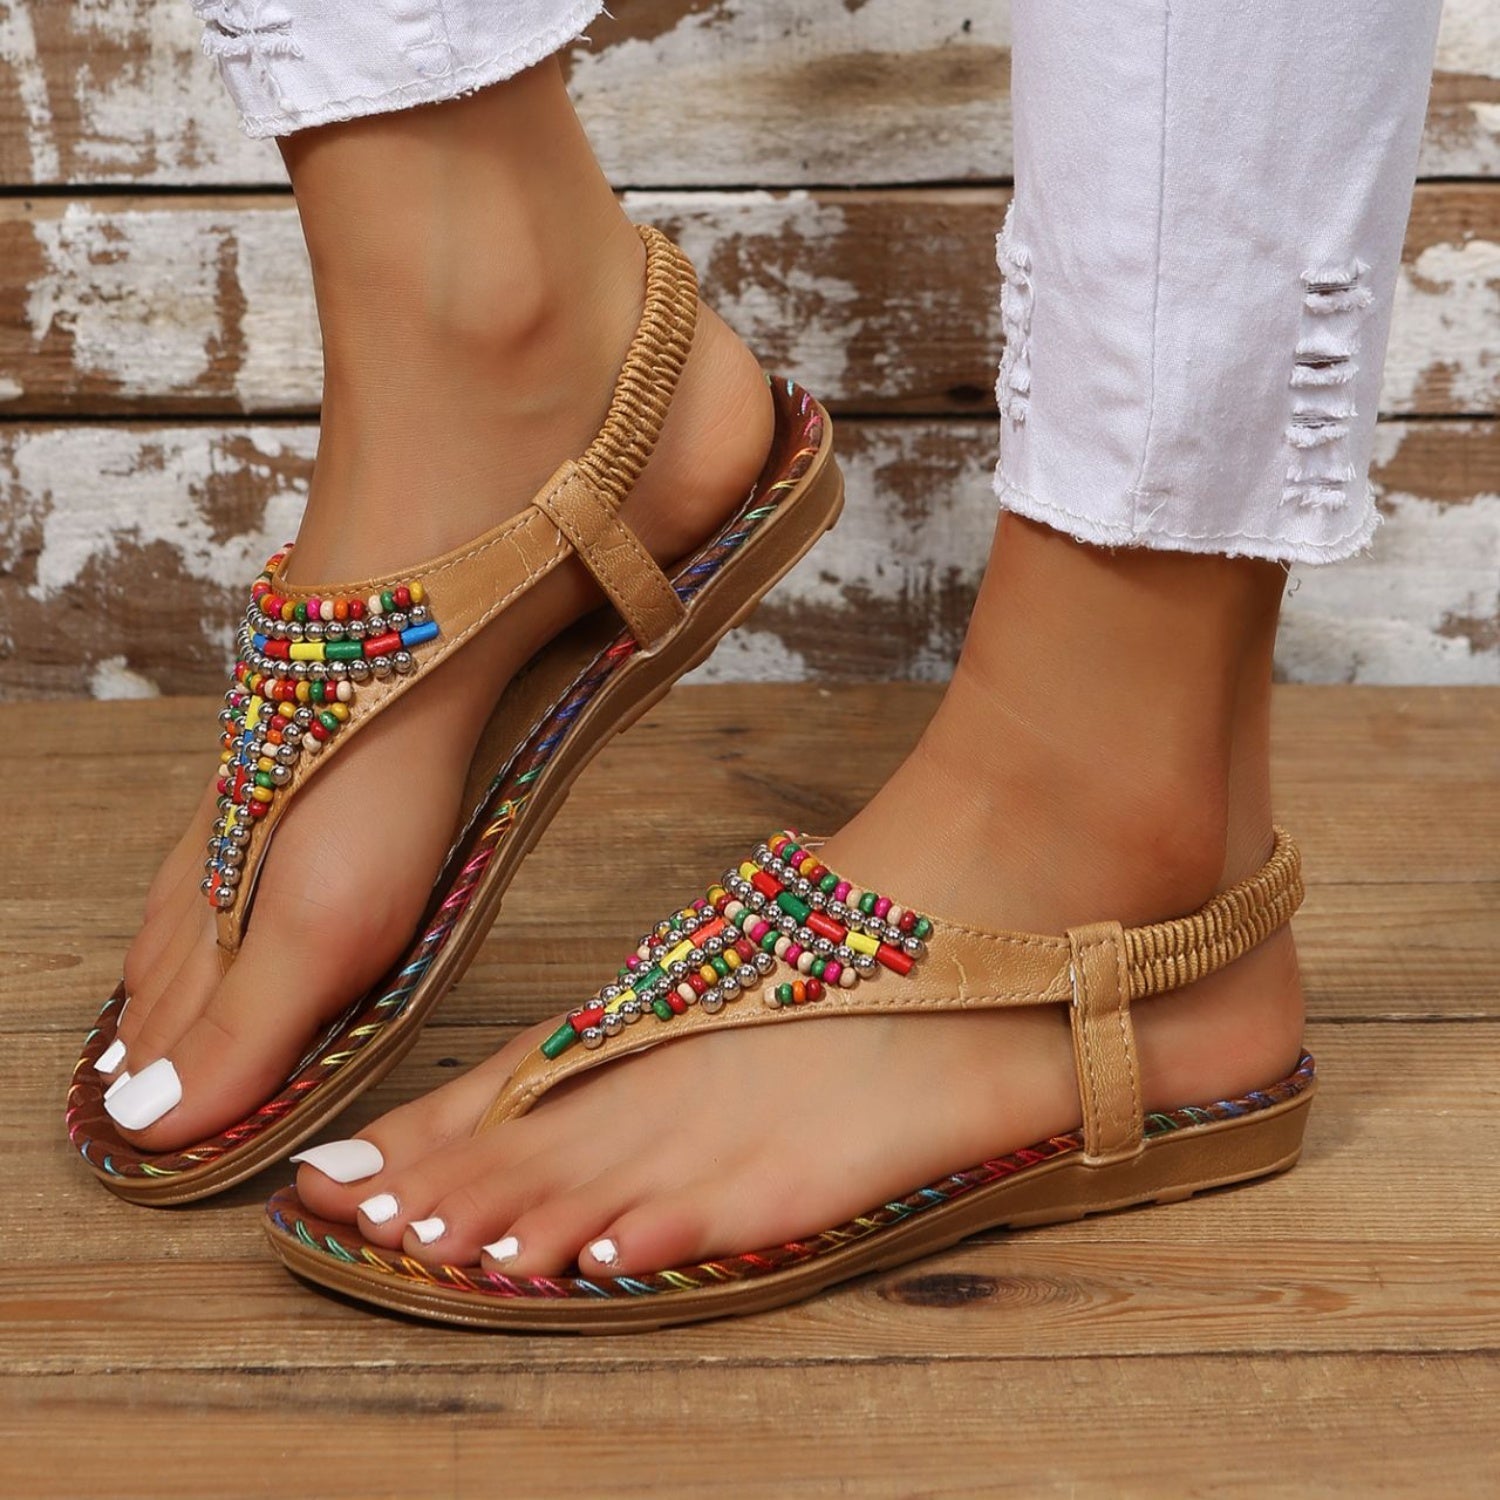 Beaded PU Leather Open Toe Sandals - OMG! Rose